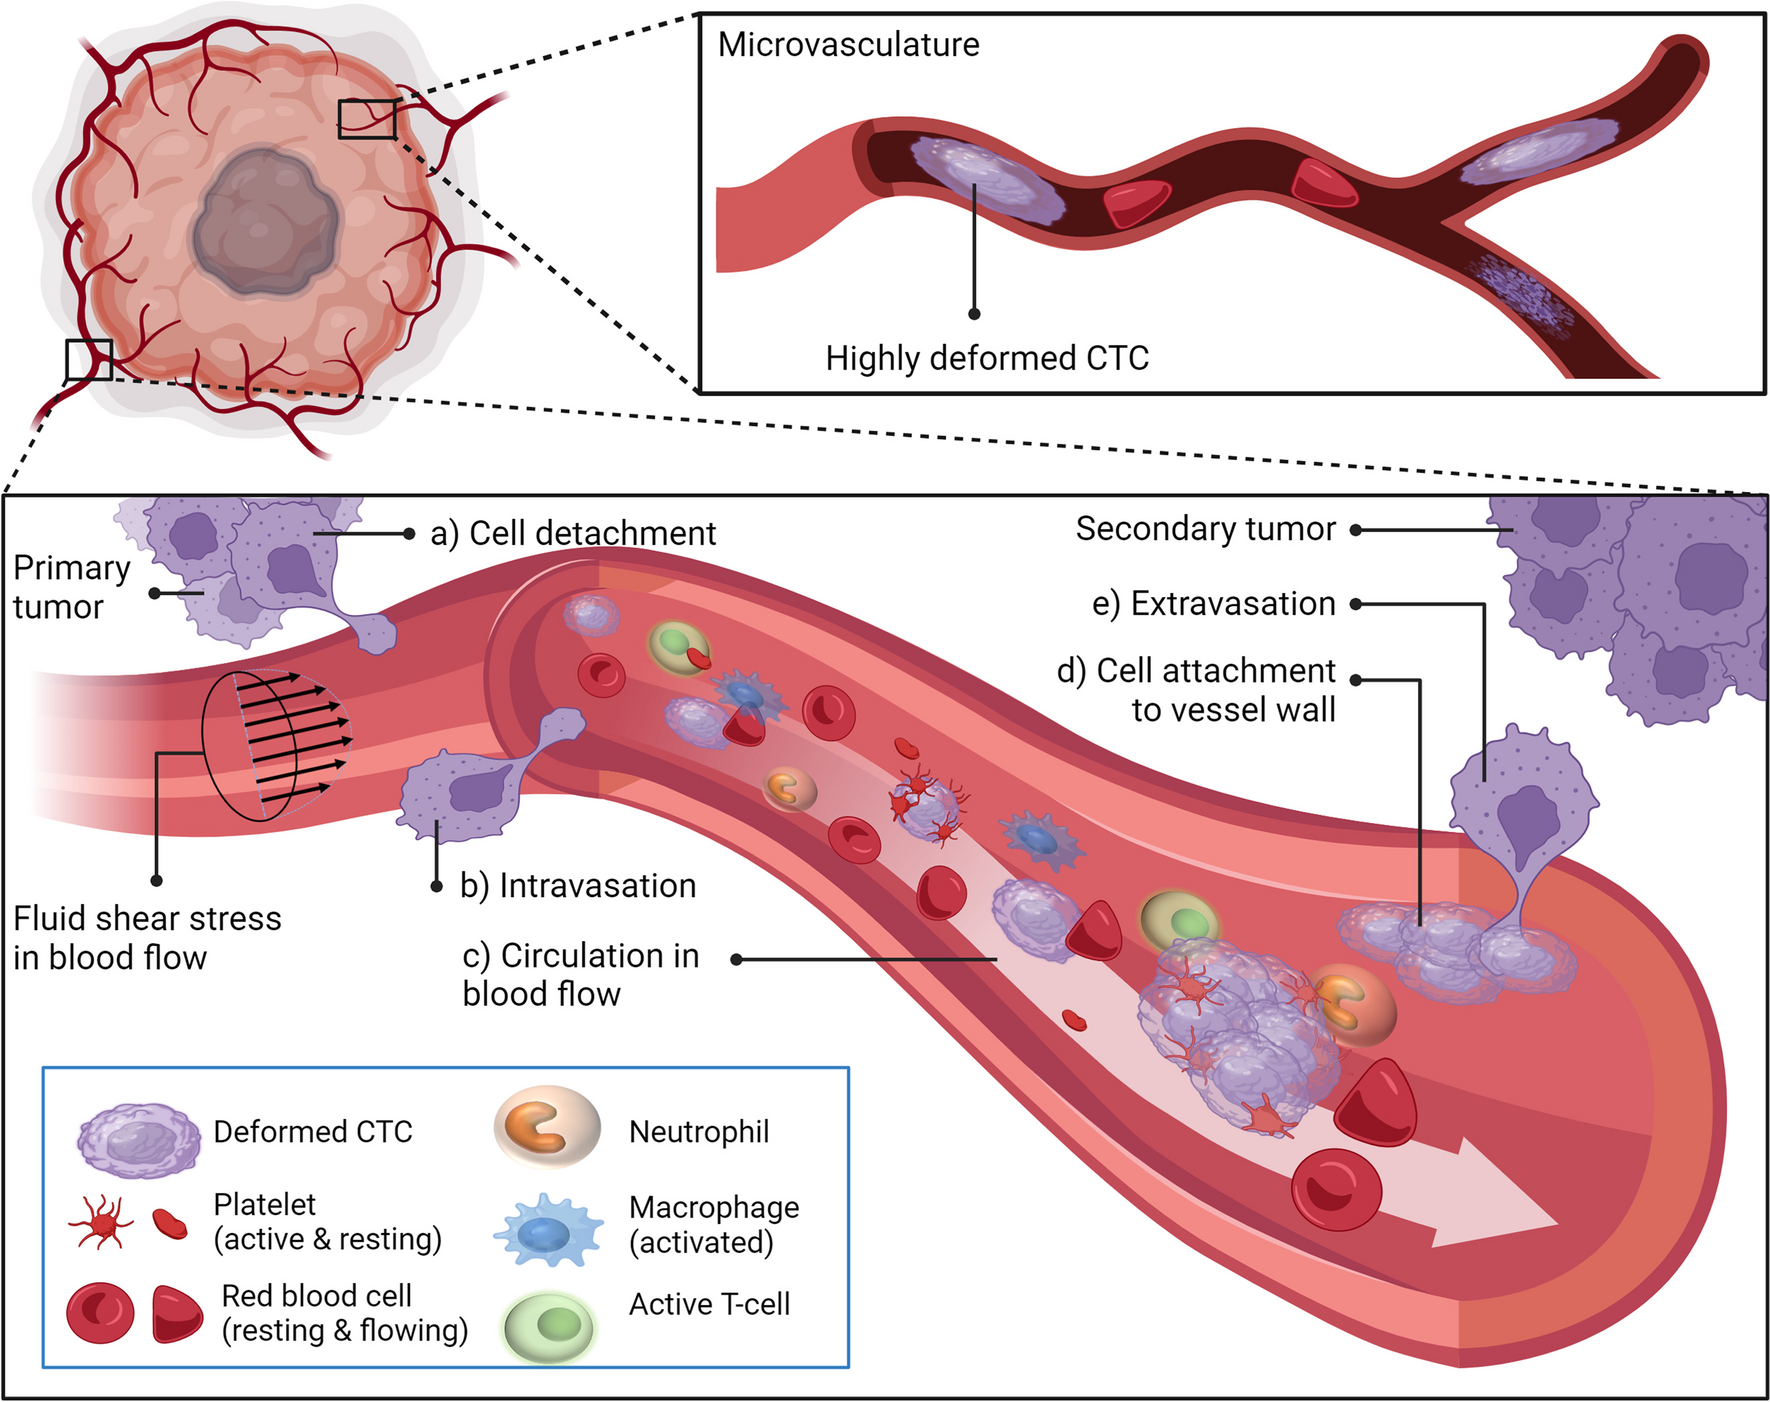 Mechanical deformation and death of circulating tumor cells in the bloodstream